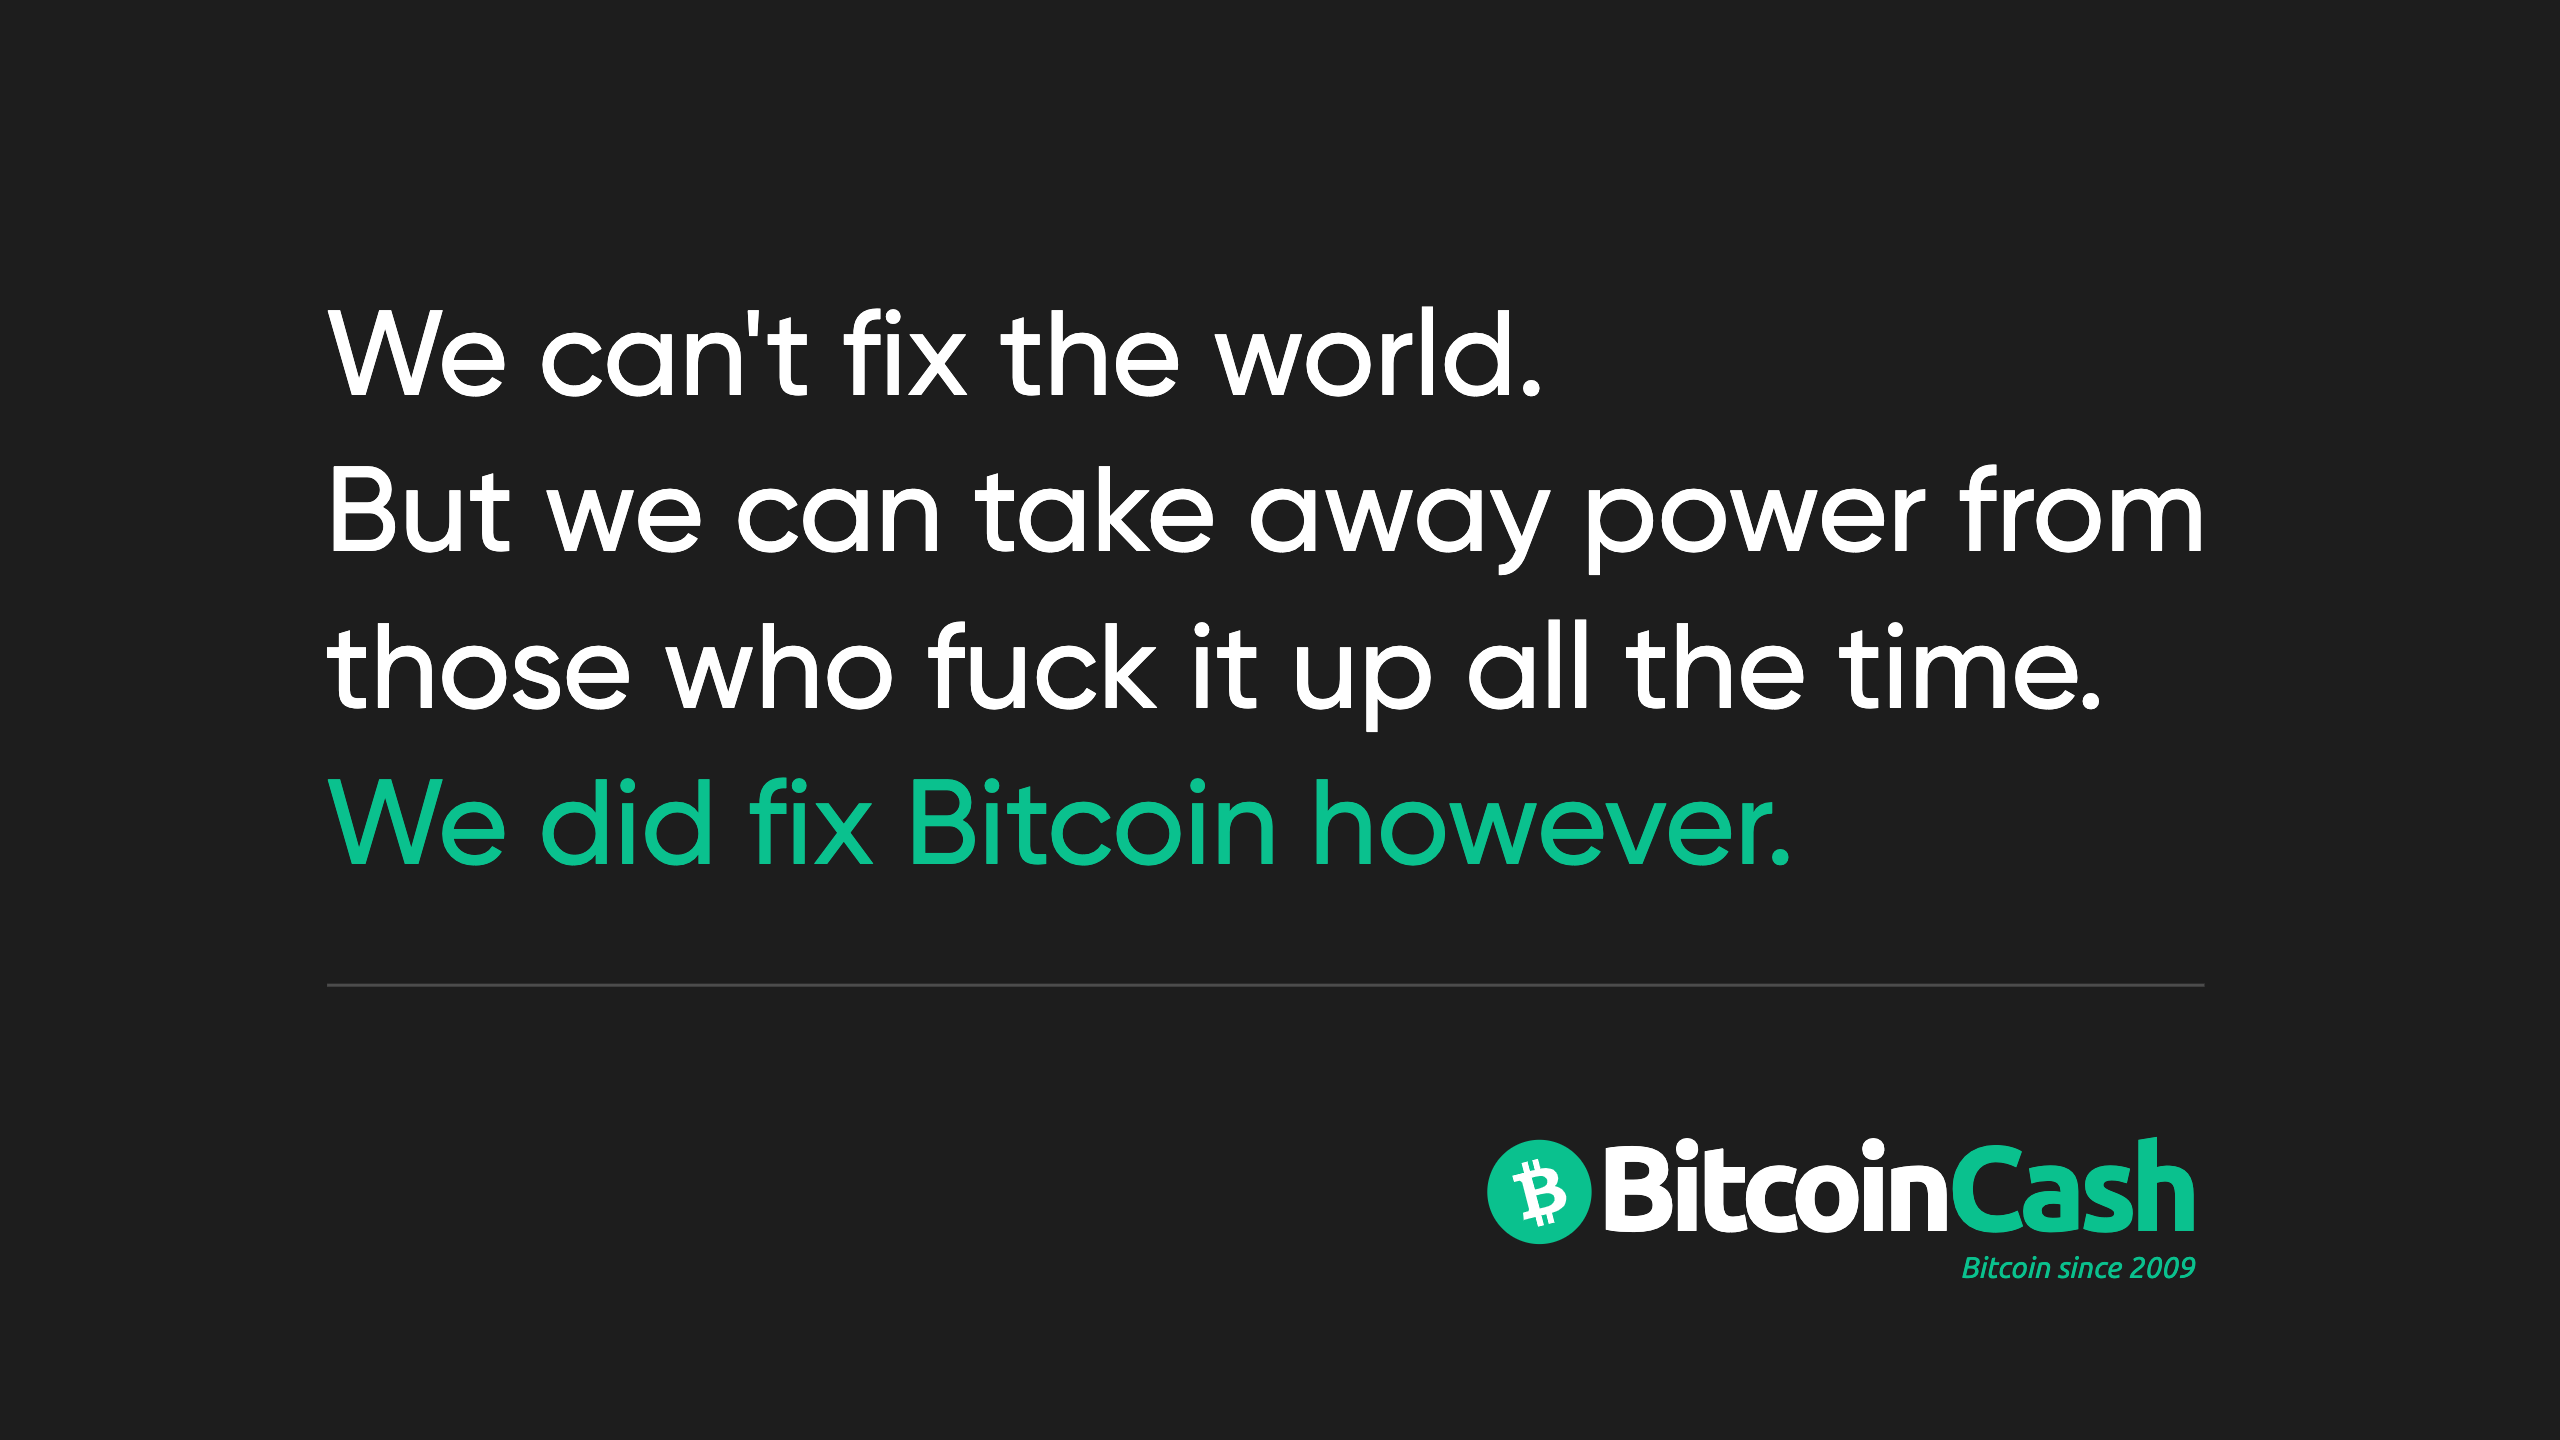 We can't fix the world. We did fix Bitcoin however.